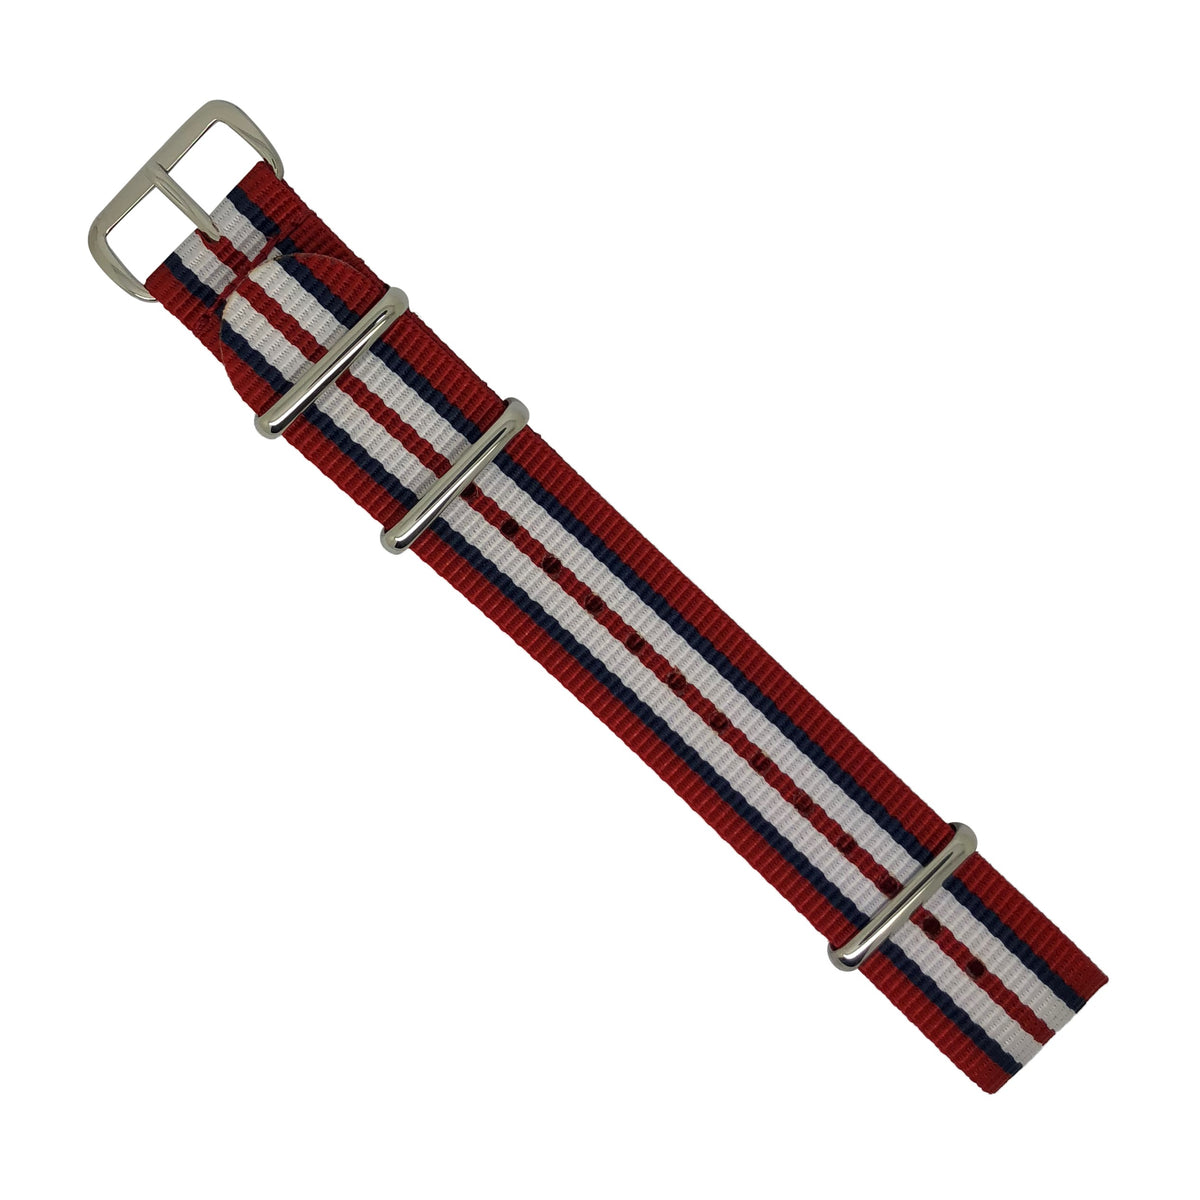 Premium Nato Strap in Red Navy White with Polished Silver Buckle (20mm) - Nomad watch Works